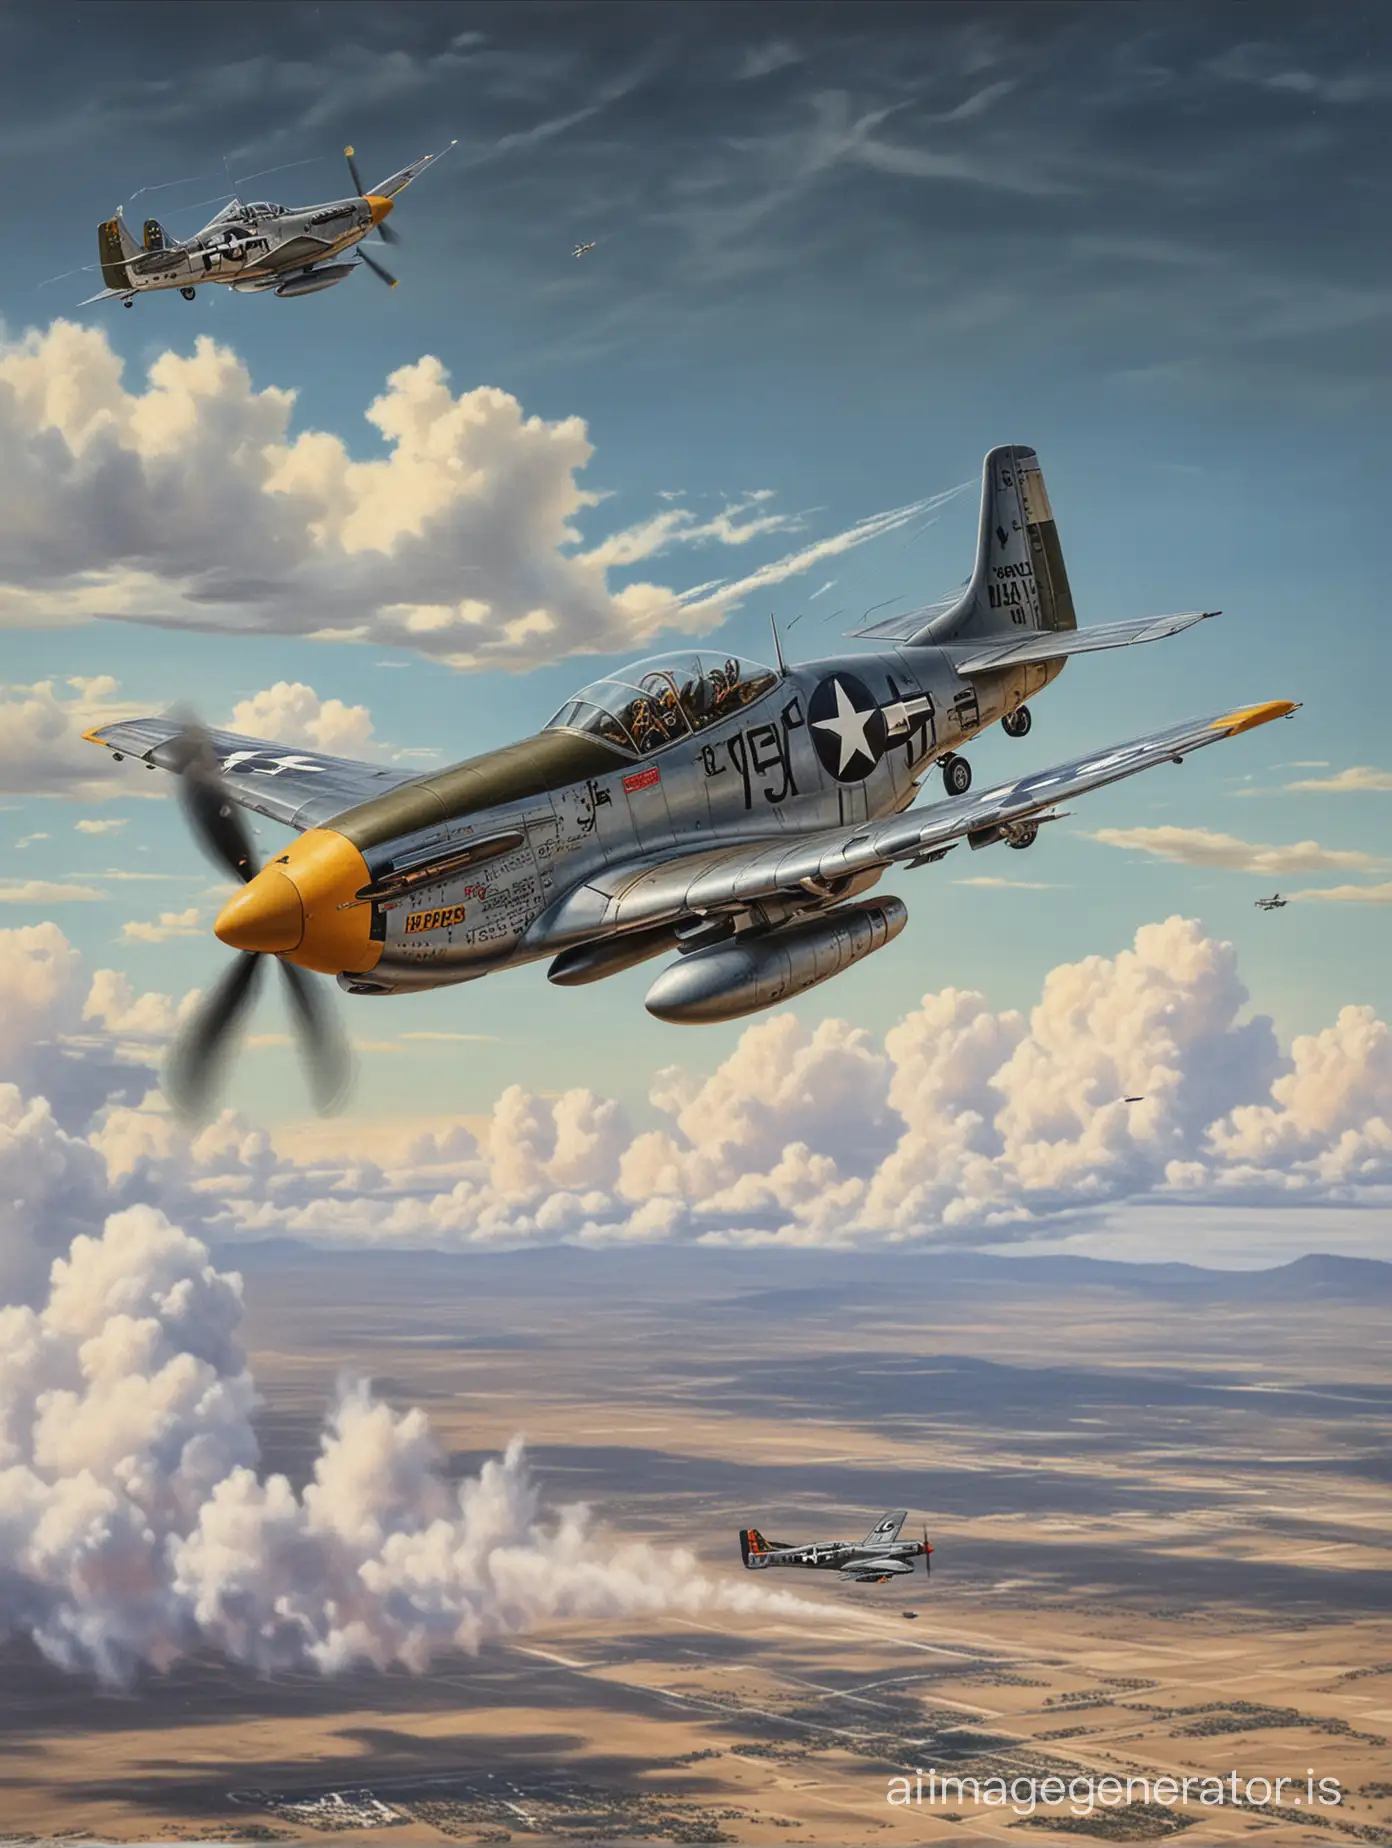  Cole Kahlo detailed oil painting of a P51 Mustang fighter with pilot ejecting